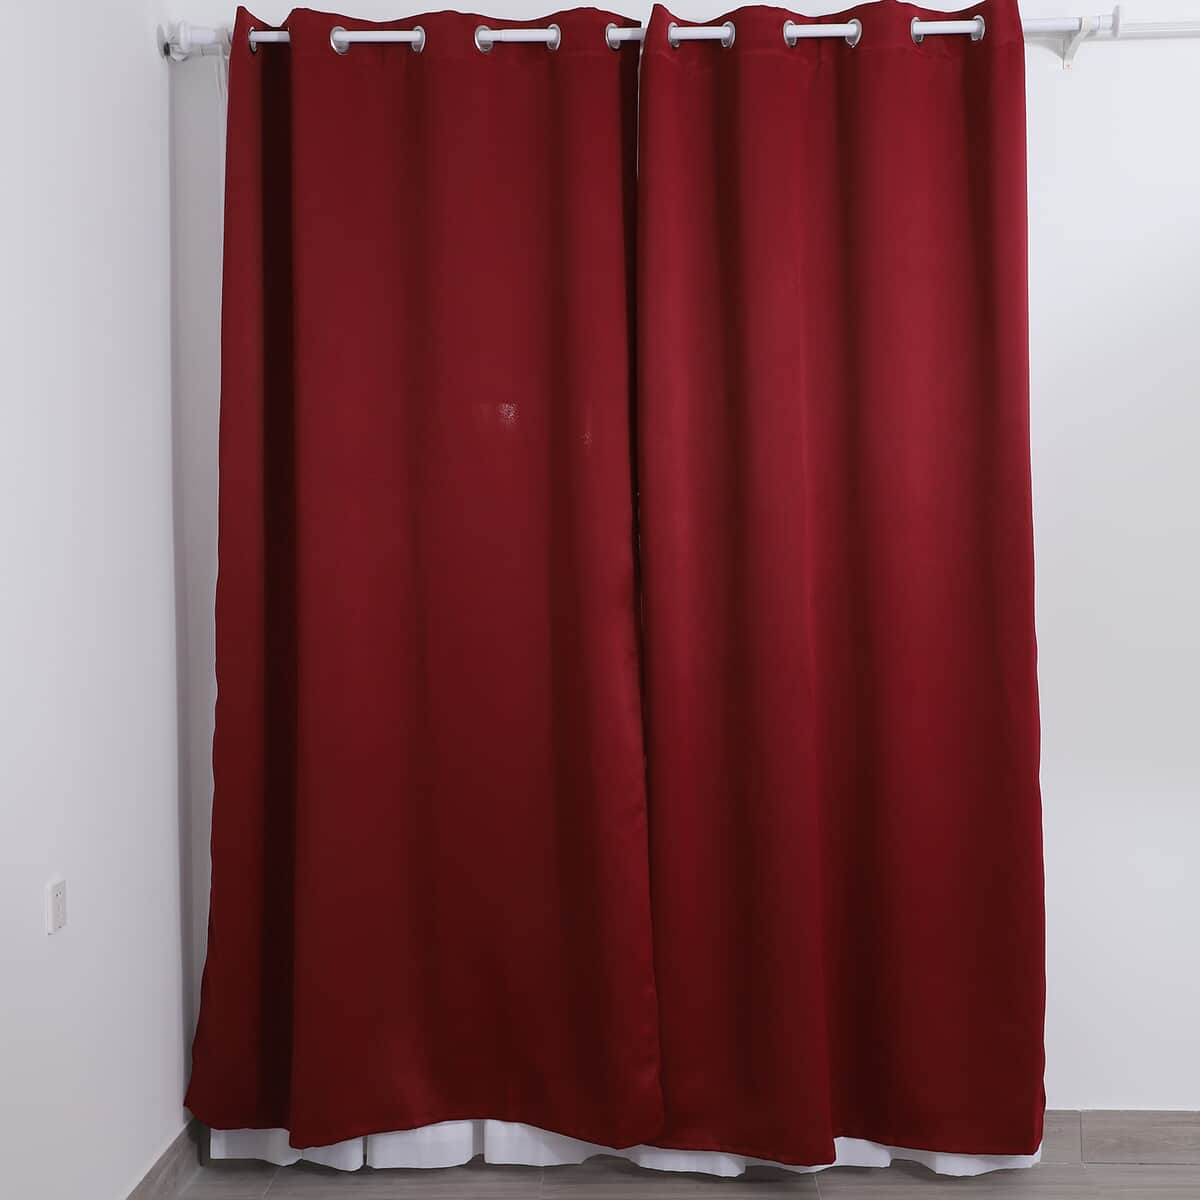 Set of 2 Burgundy Solid Blackout Curtain with 8 Metal Rings image number 0